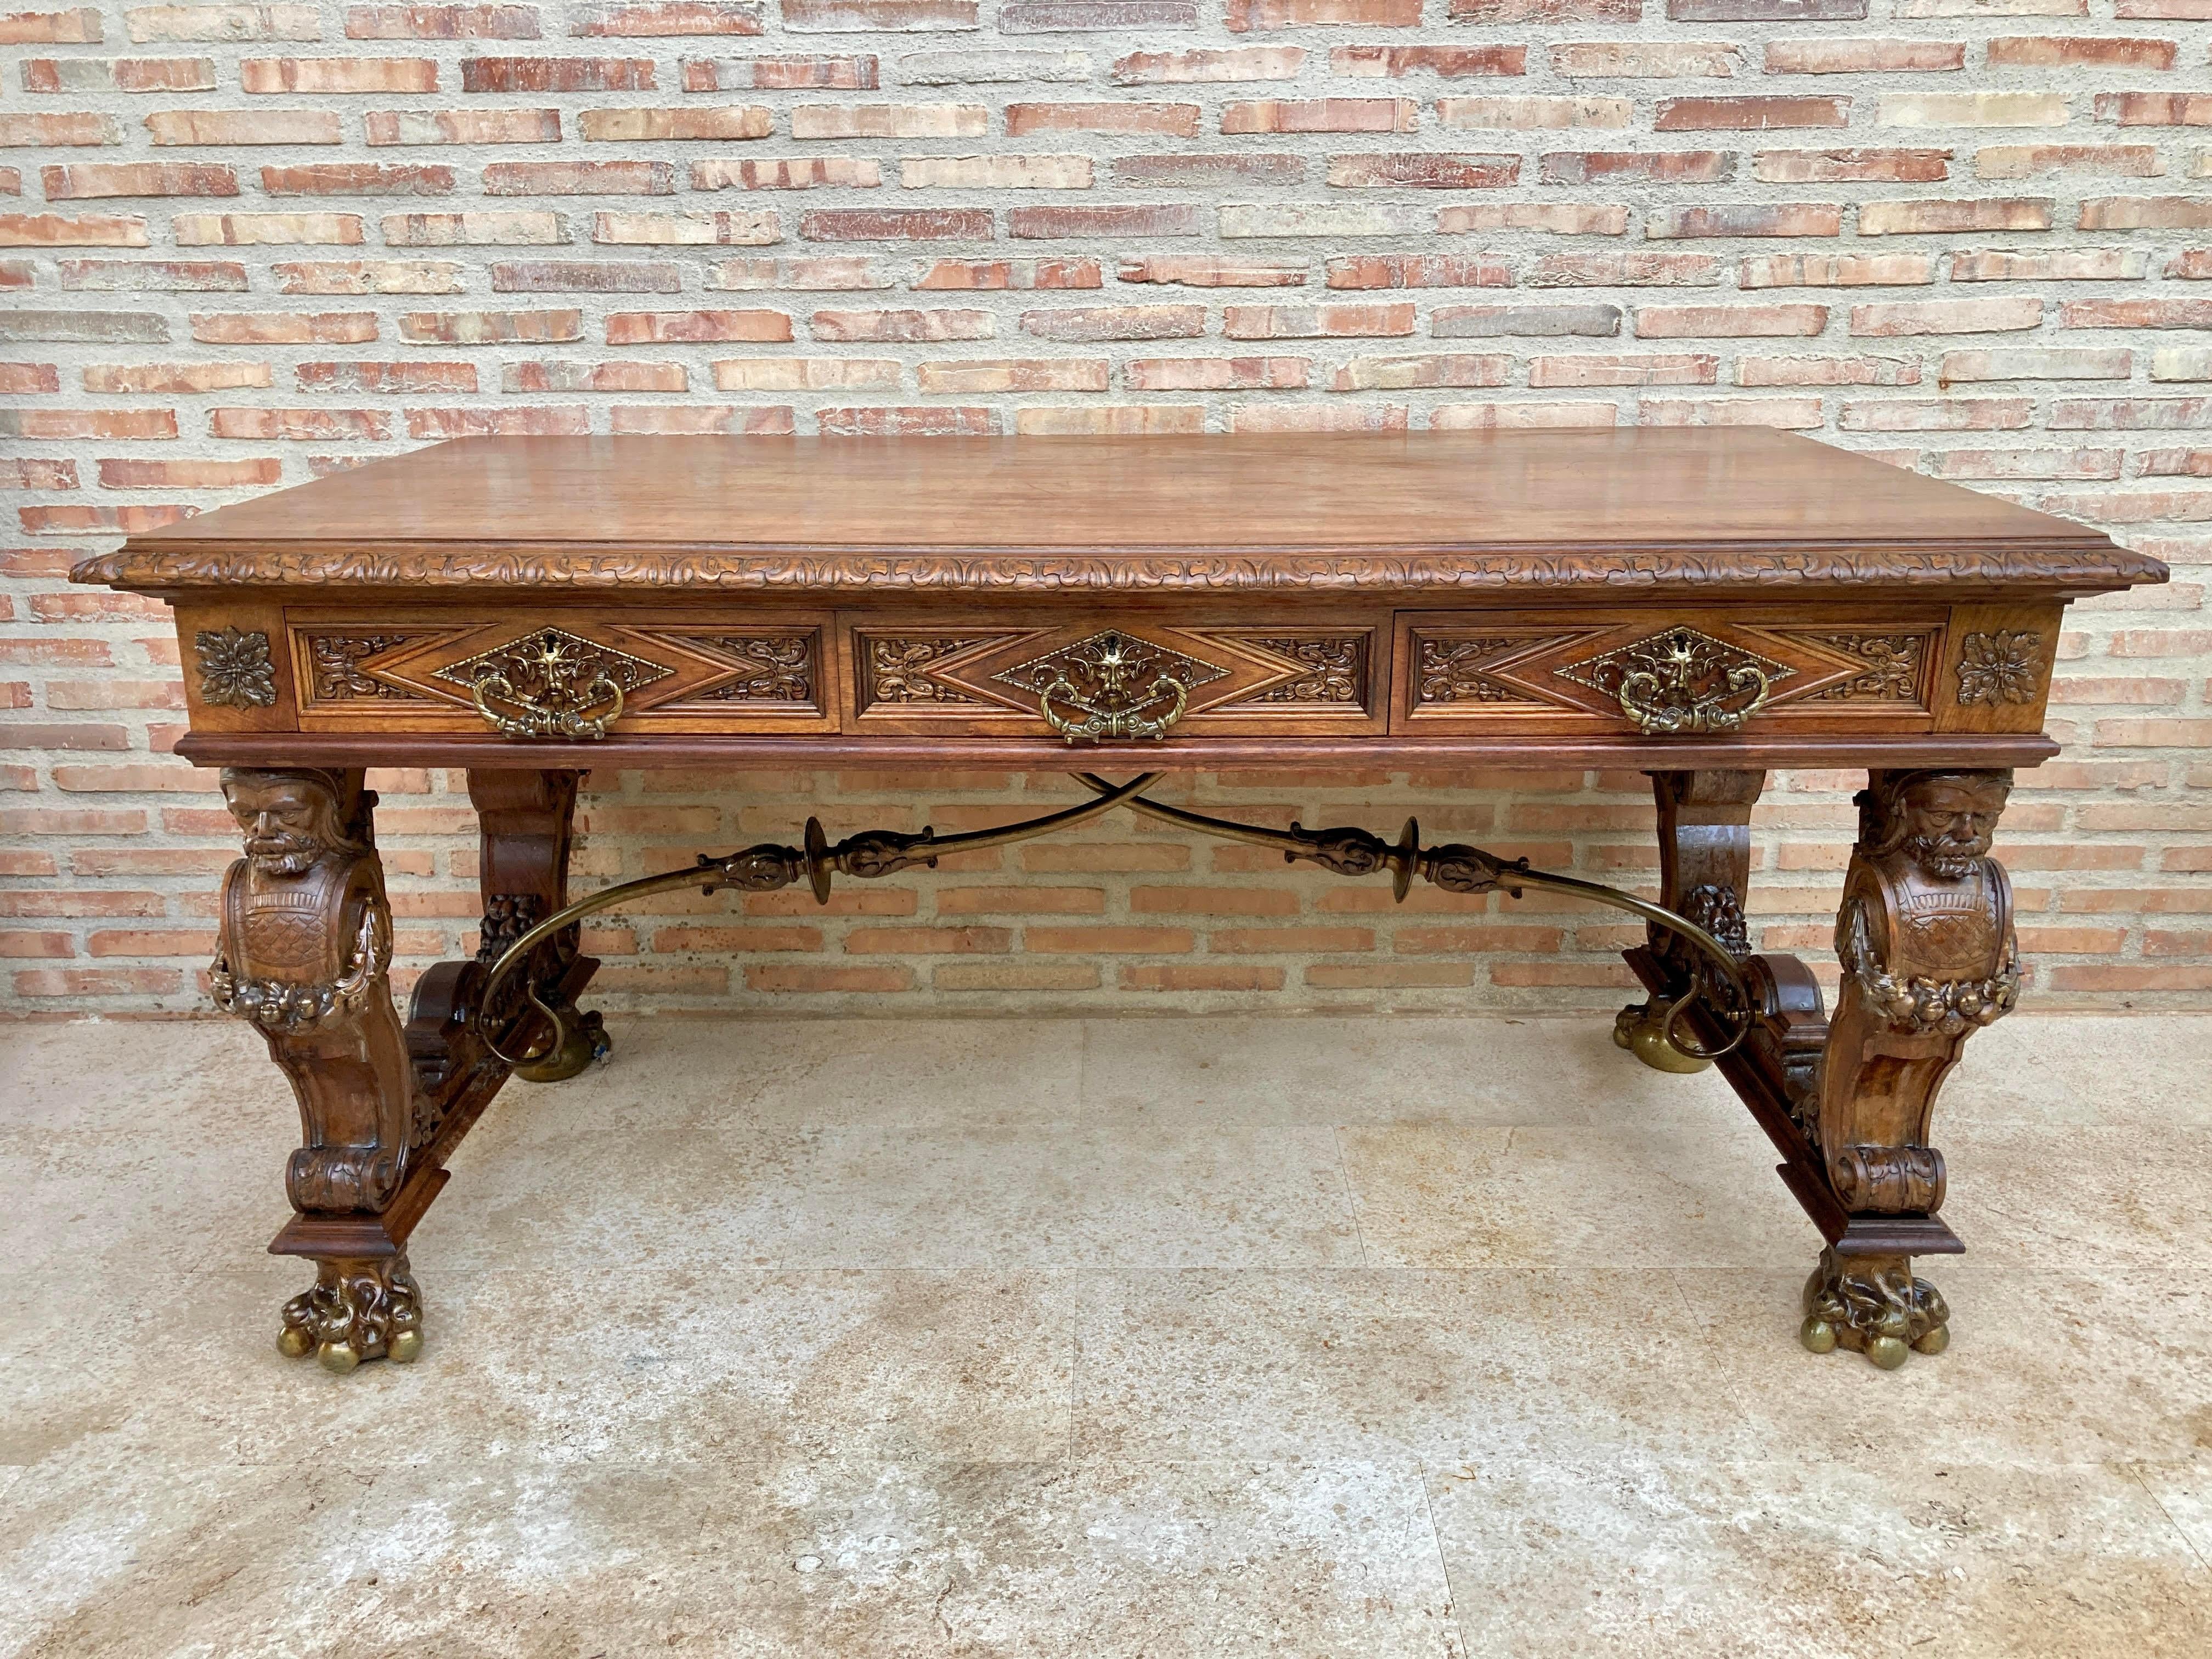 The 19th century Spanish Renaissance walnut desk is a splendid example of the breed, with classical architecture enhanced by hand-carved reliefs in an abstract expression of the Renaissance style. Four carved columns representing the lords form the